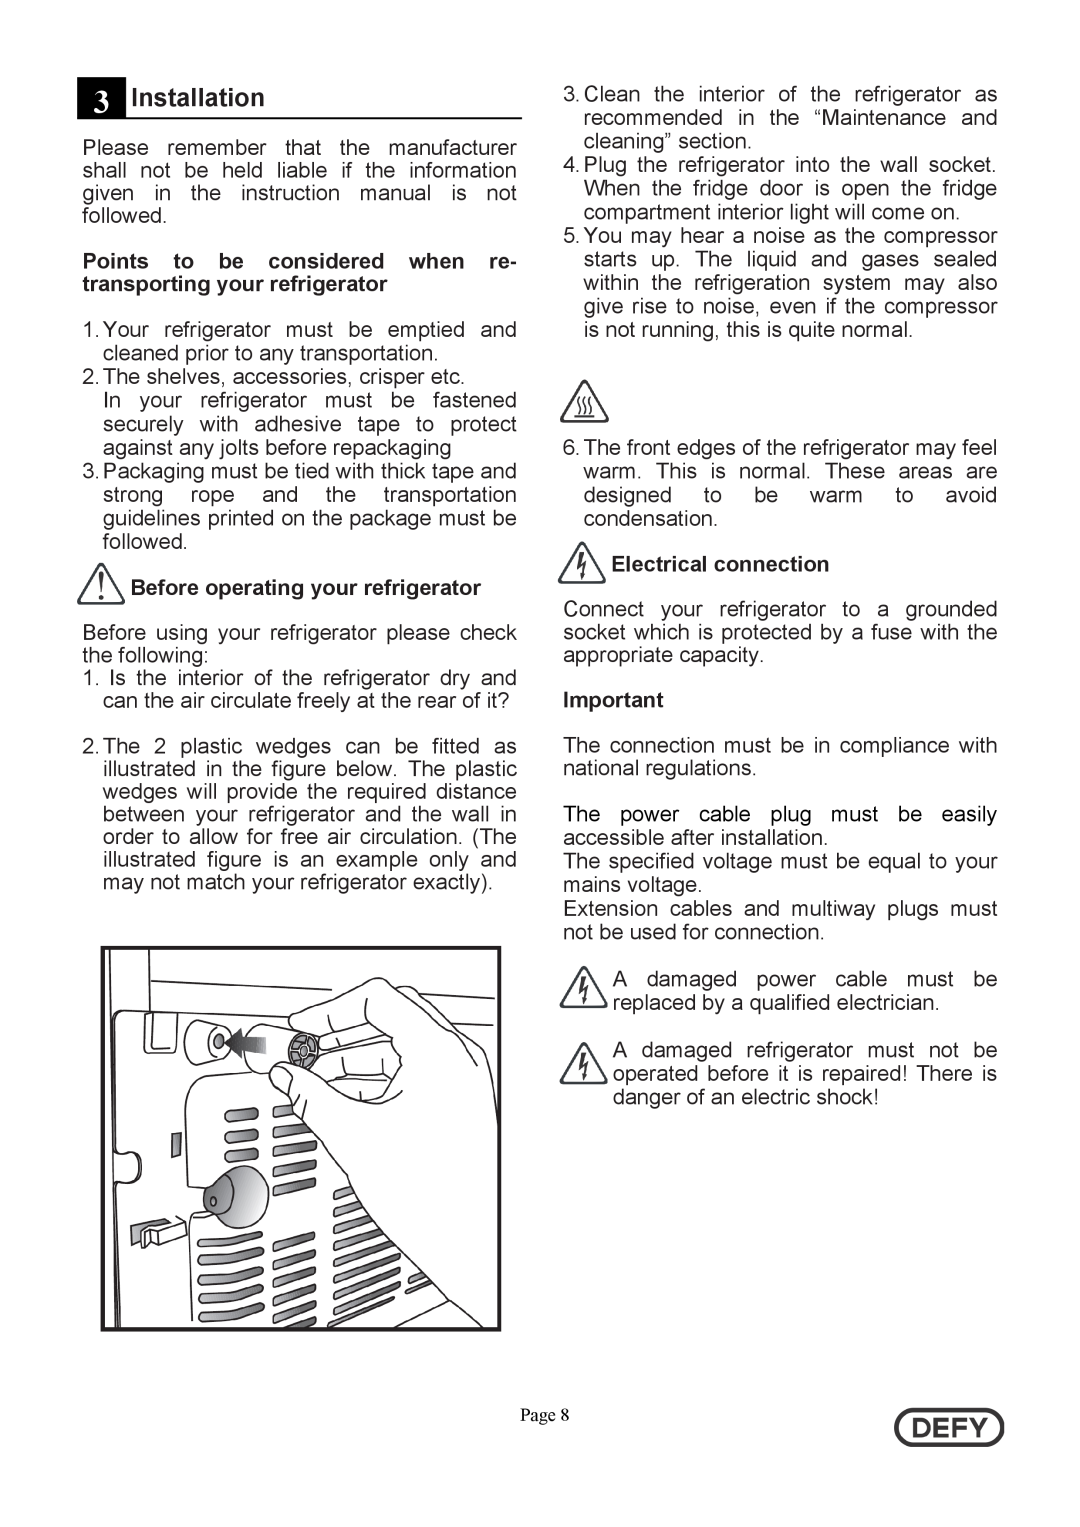 Defy Appliances DFD442 instruction manual 3Installation, Before operating your refrigerator, Electrical connection 